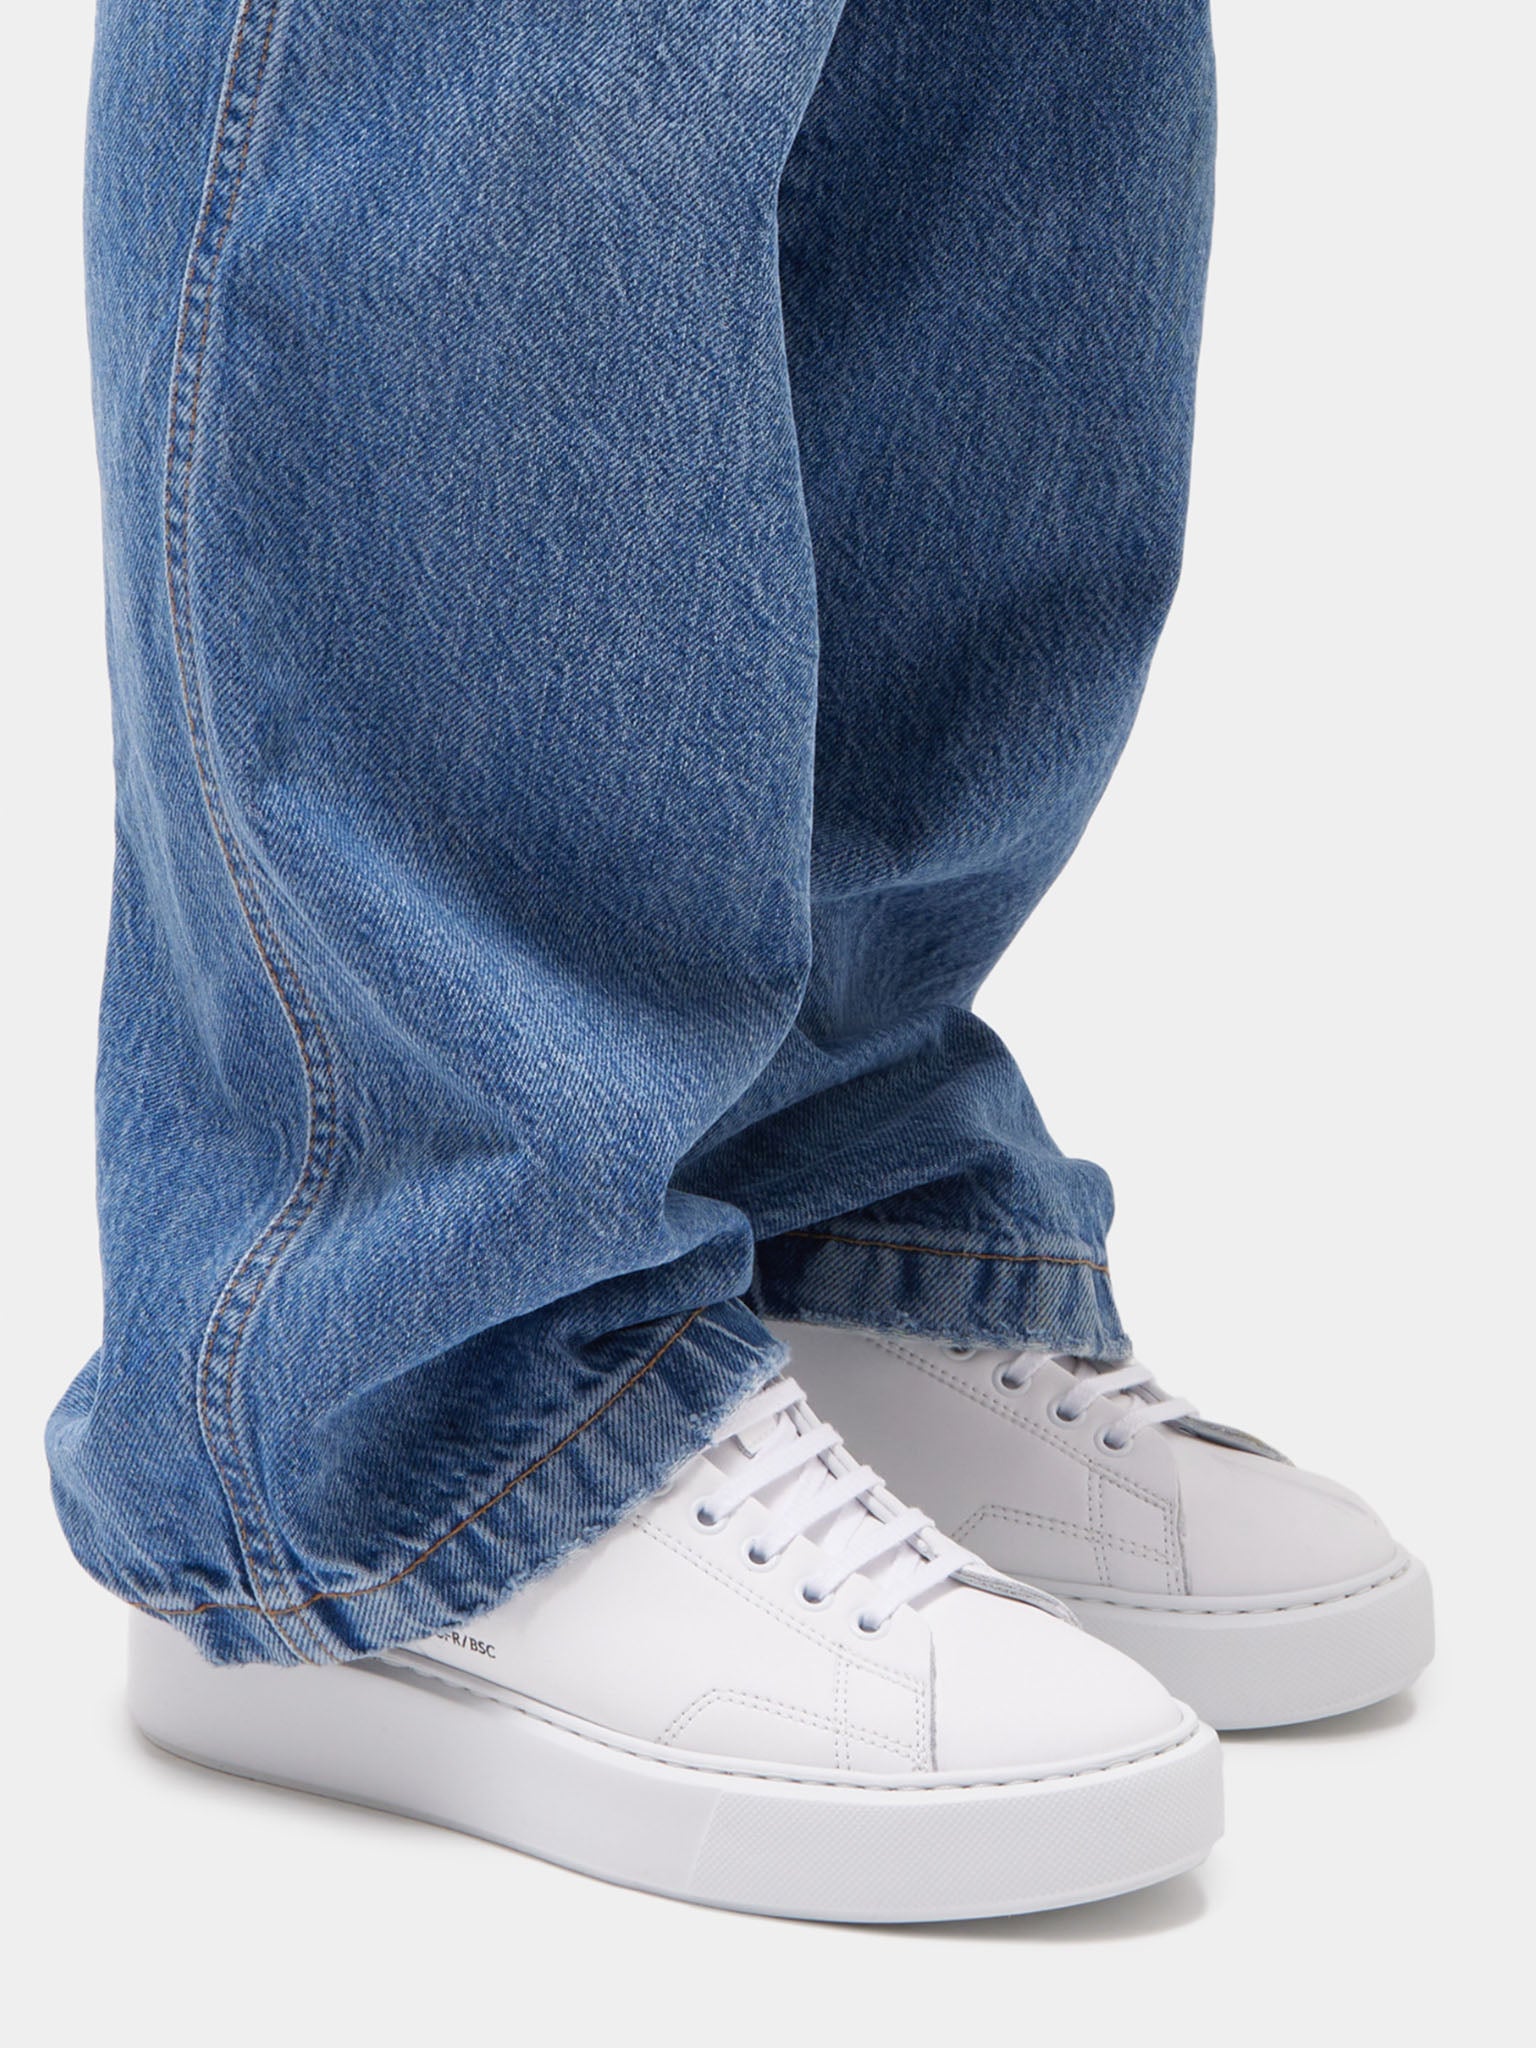 D.A.T.E Sfera Calf White Trainers on model wearing blue jeans